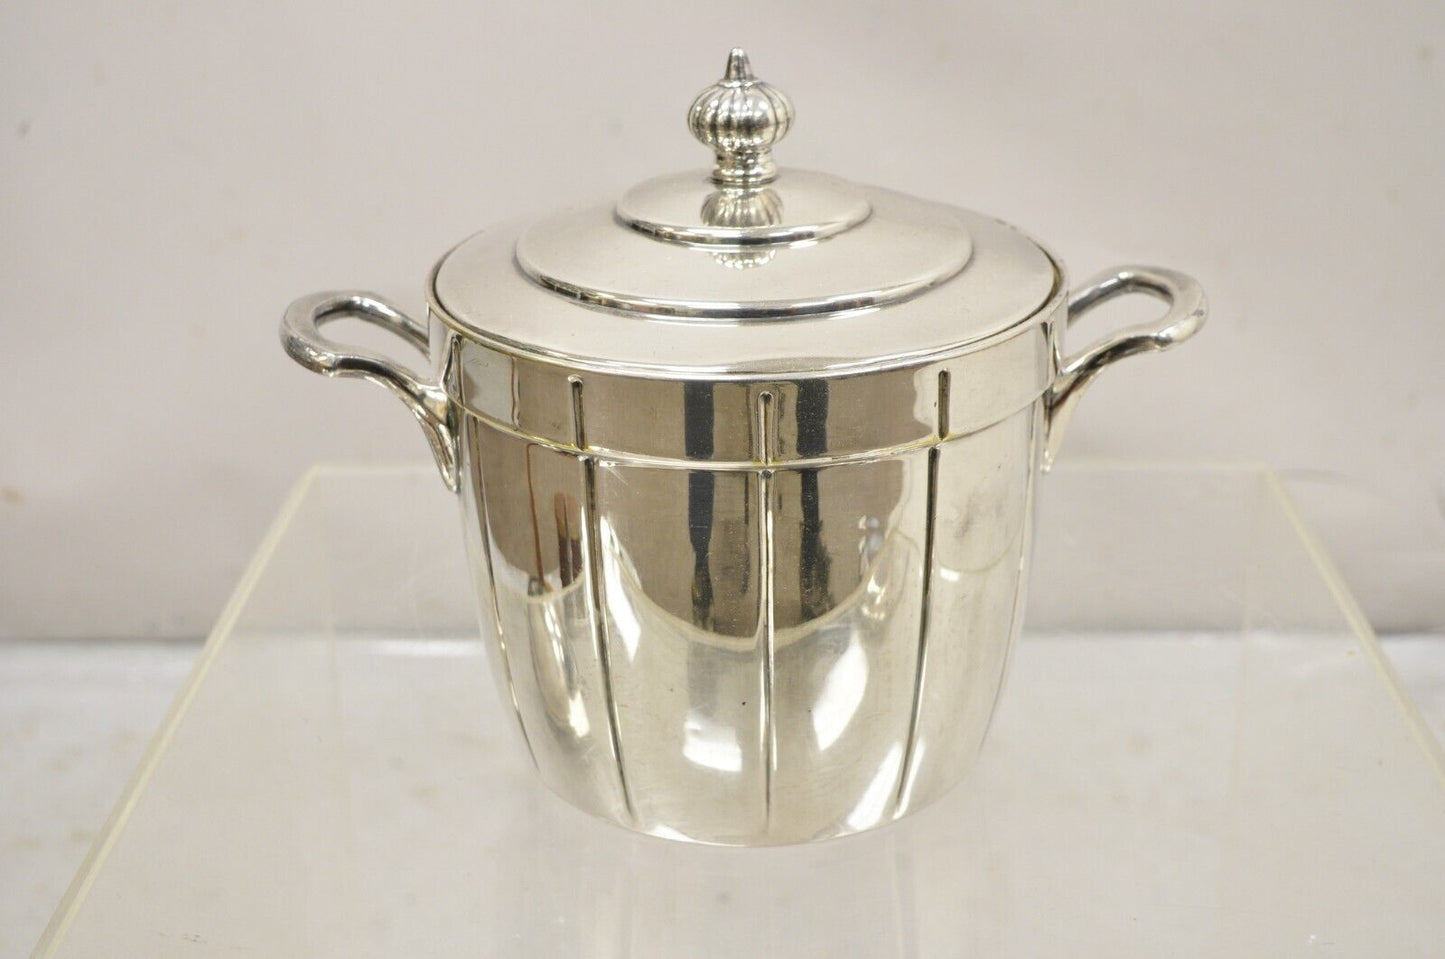 Vintage Manning-Bowman & Co Modern Silver Plated Lidded Ice Bucket